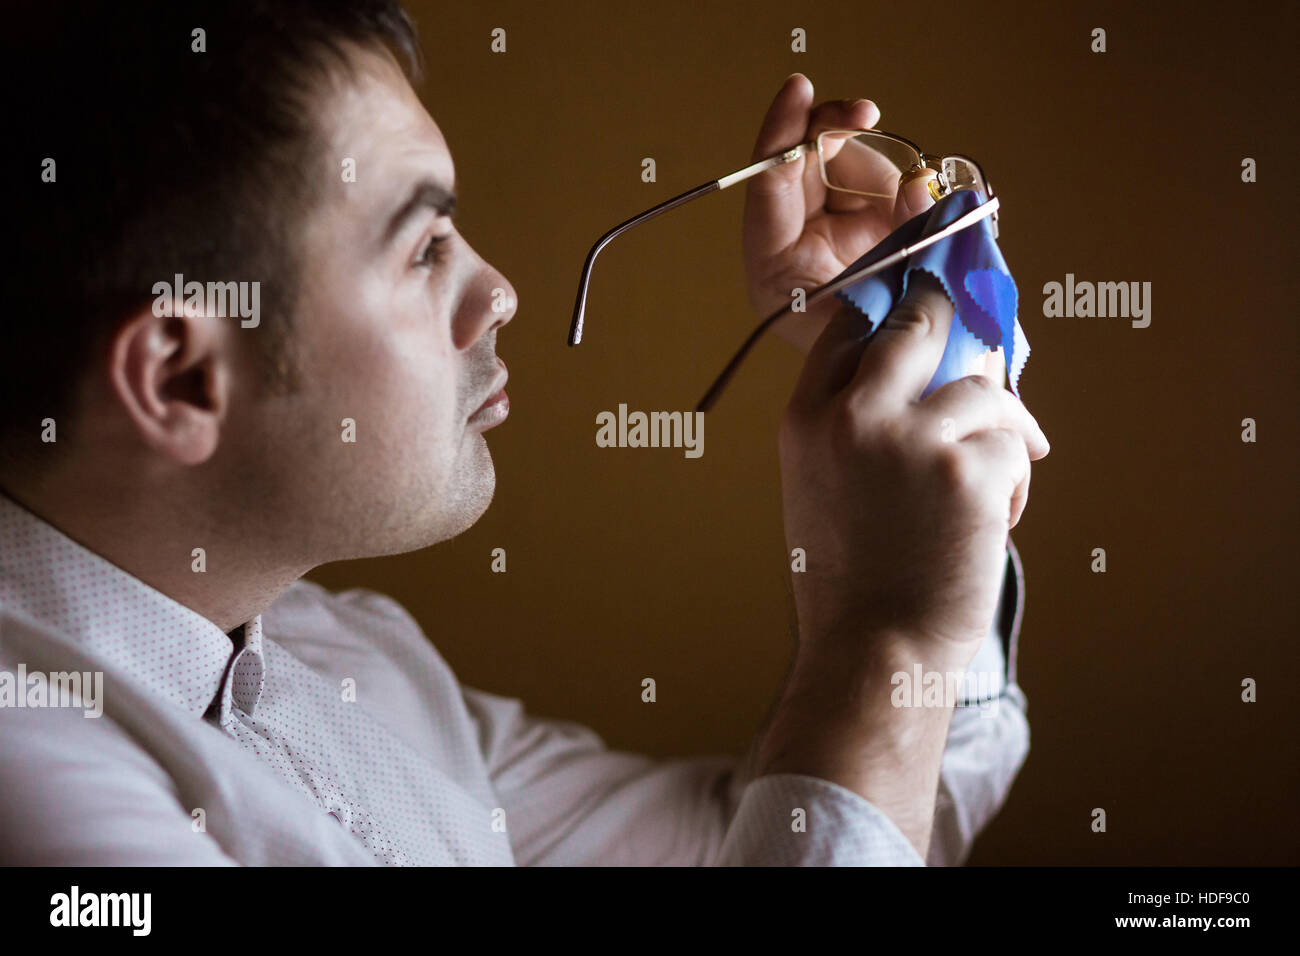 Man cleaning a softie lens of computer glasses Stock Photo